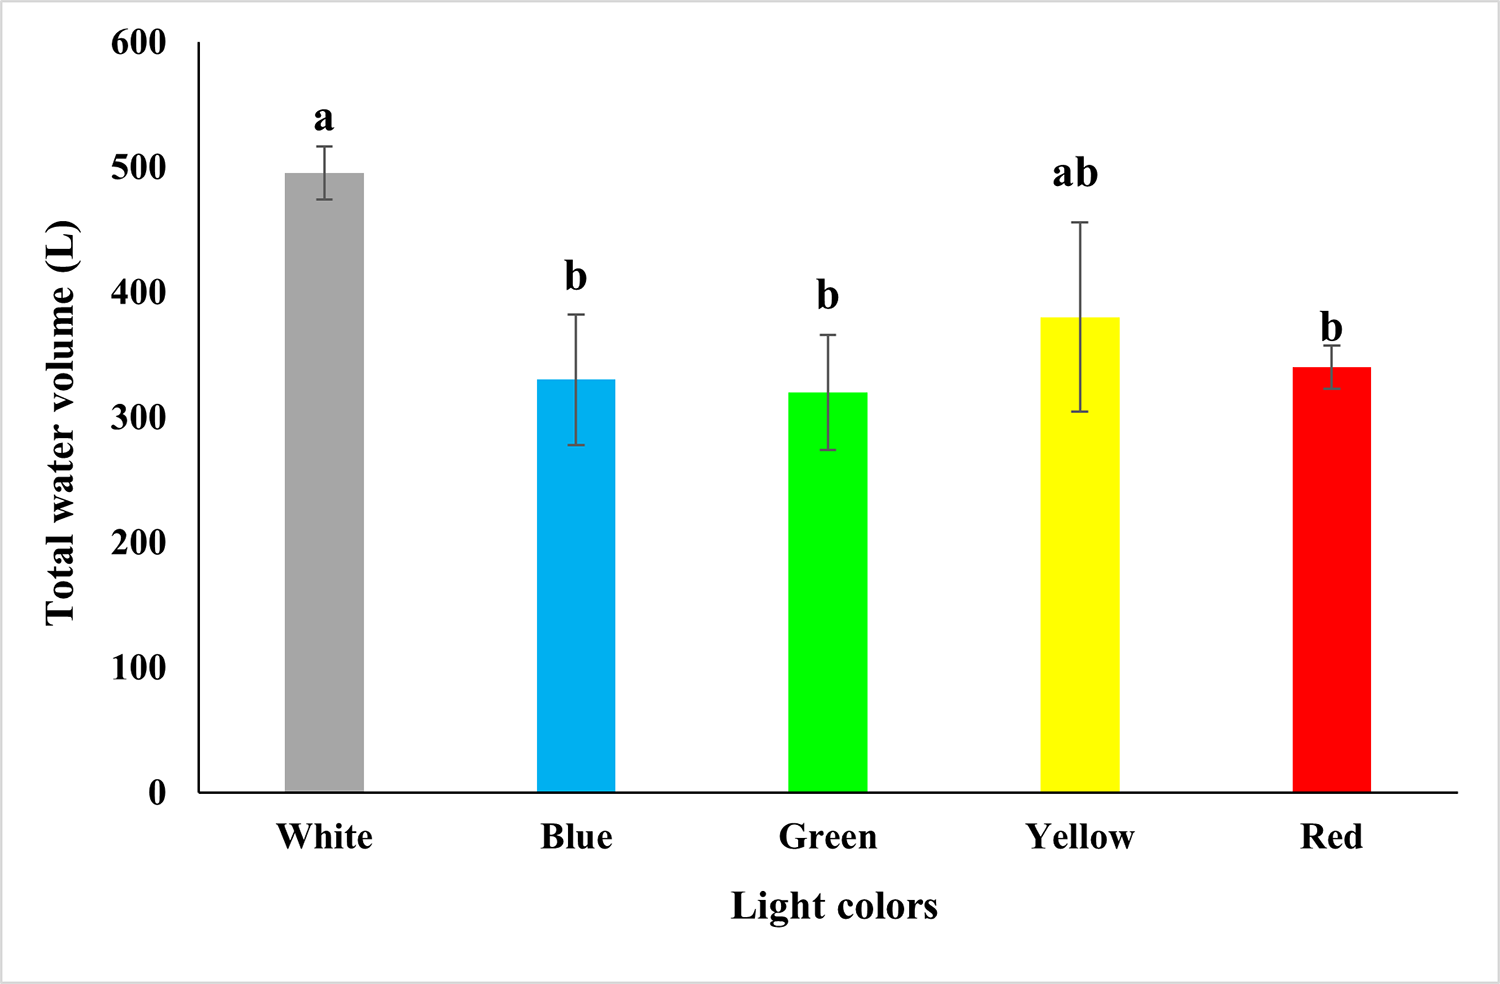 Fig. 1: Mean values (± SD) of total amount of water (liters) in the treatments exposing <em>L. vannamei</em> reared in a biofloc system to different light colors.